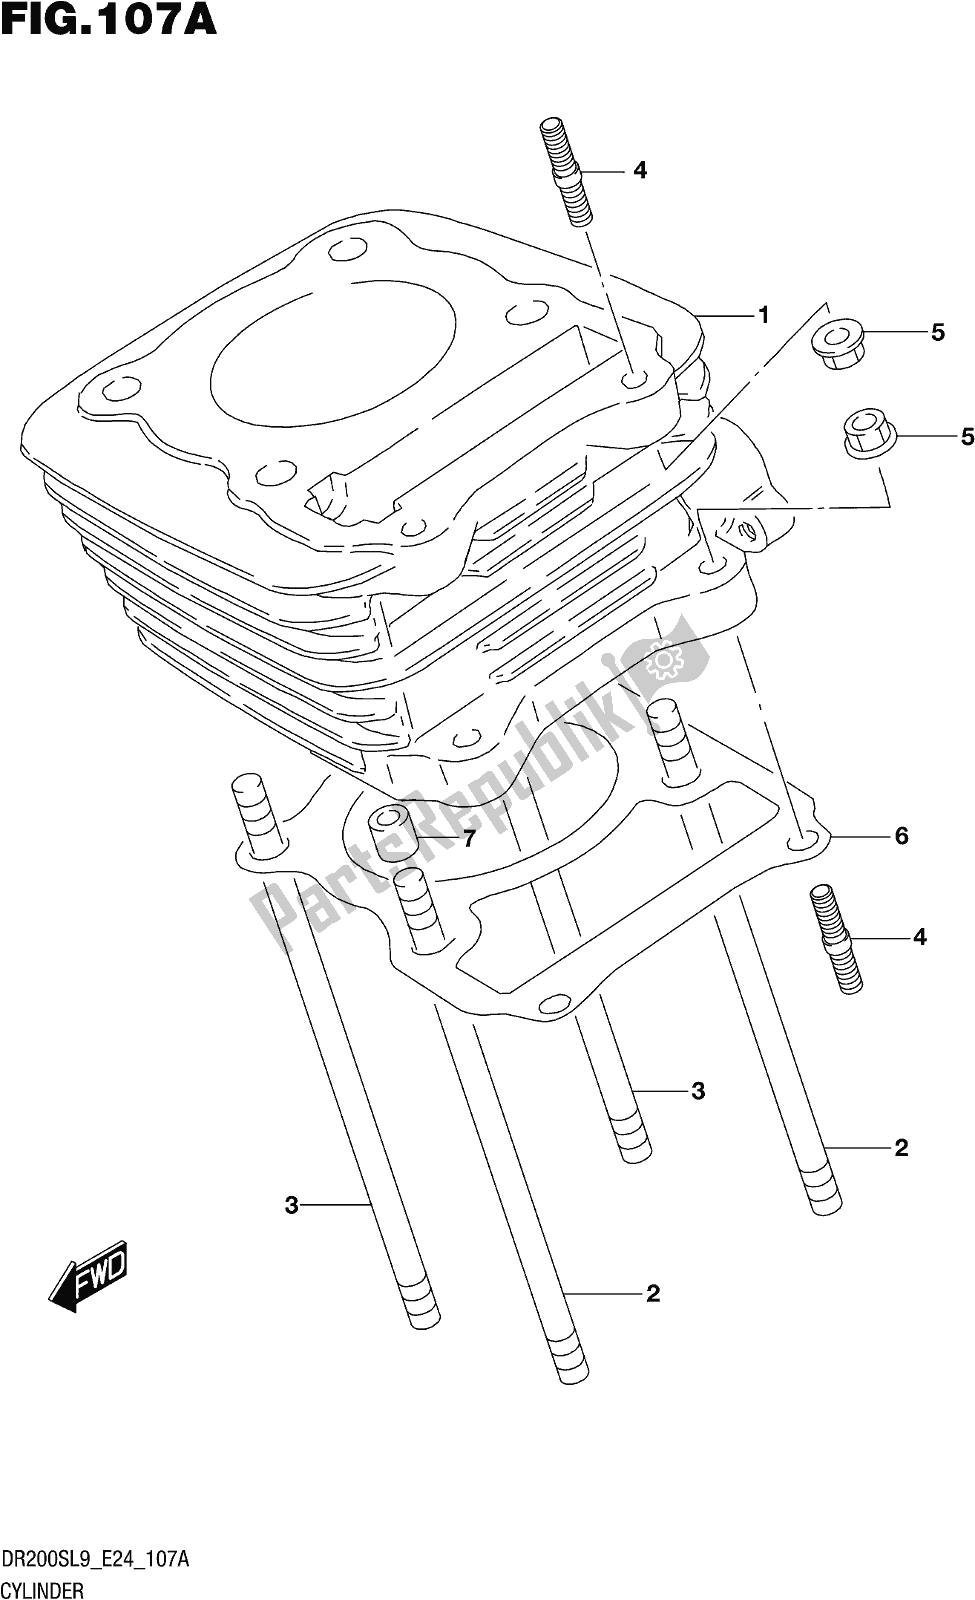 All parts for the Fig. 107a Cylinder of the Suzuki DR 200S 2019